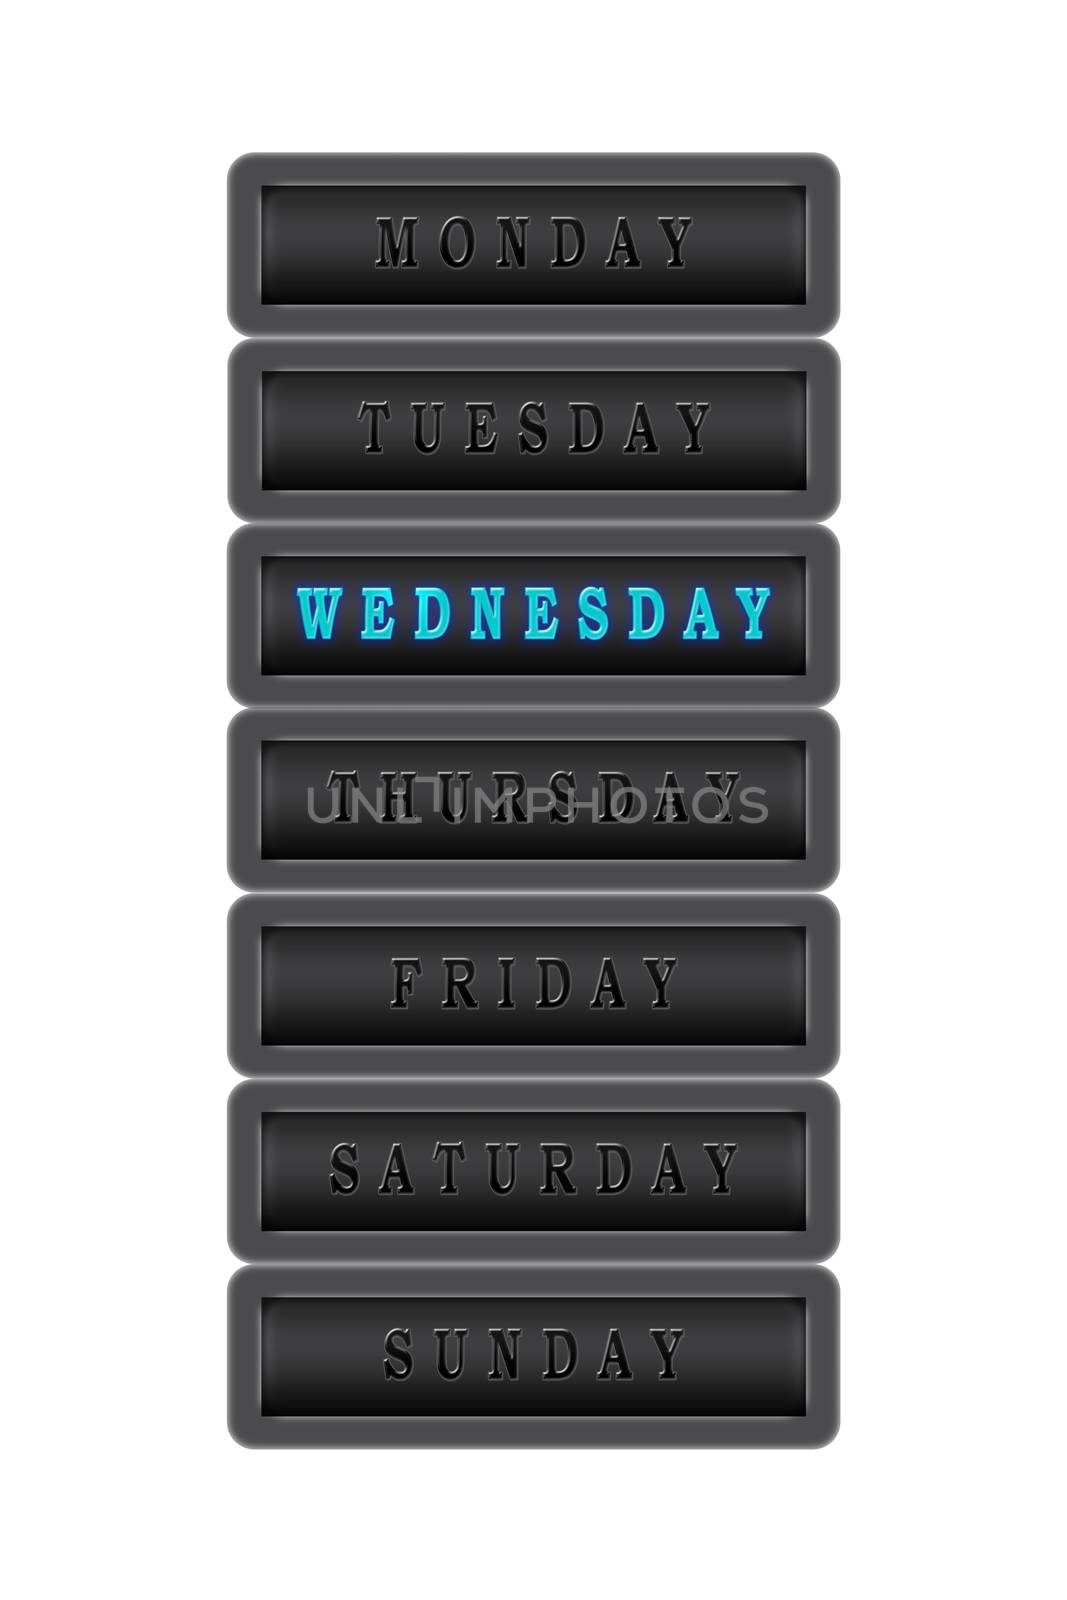 Among the days of the week, the environment is highlighted in blue on a dark background.  The rest of the days are black on a dark background.